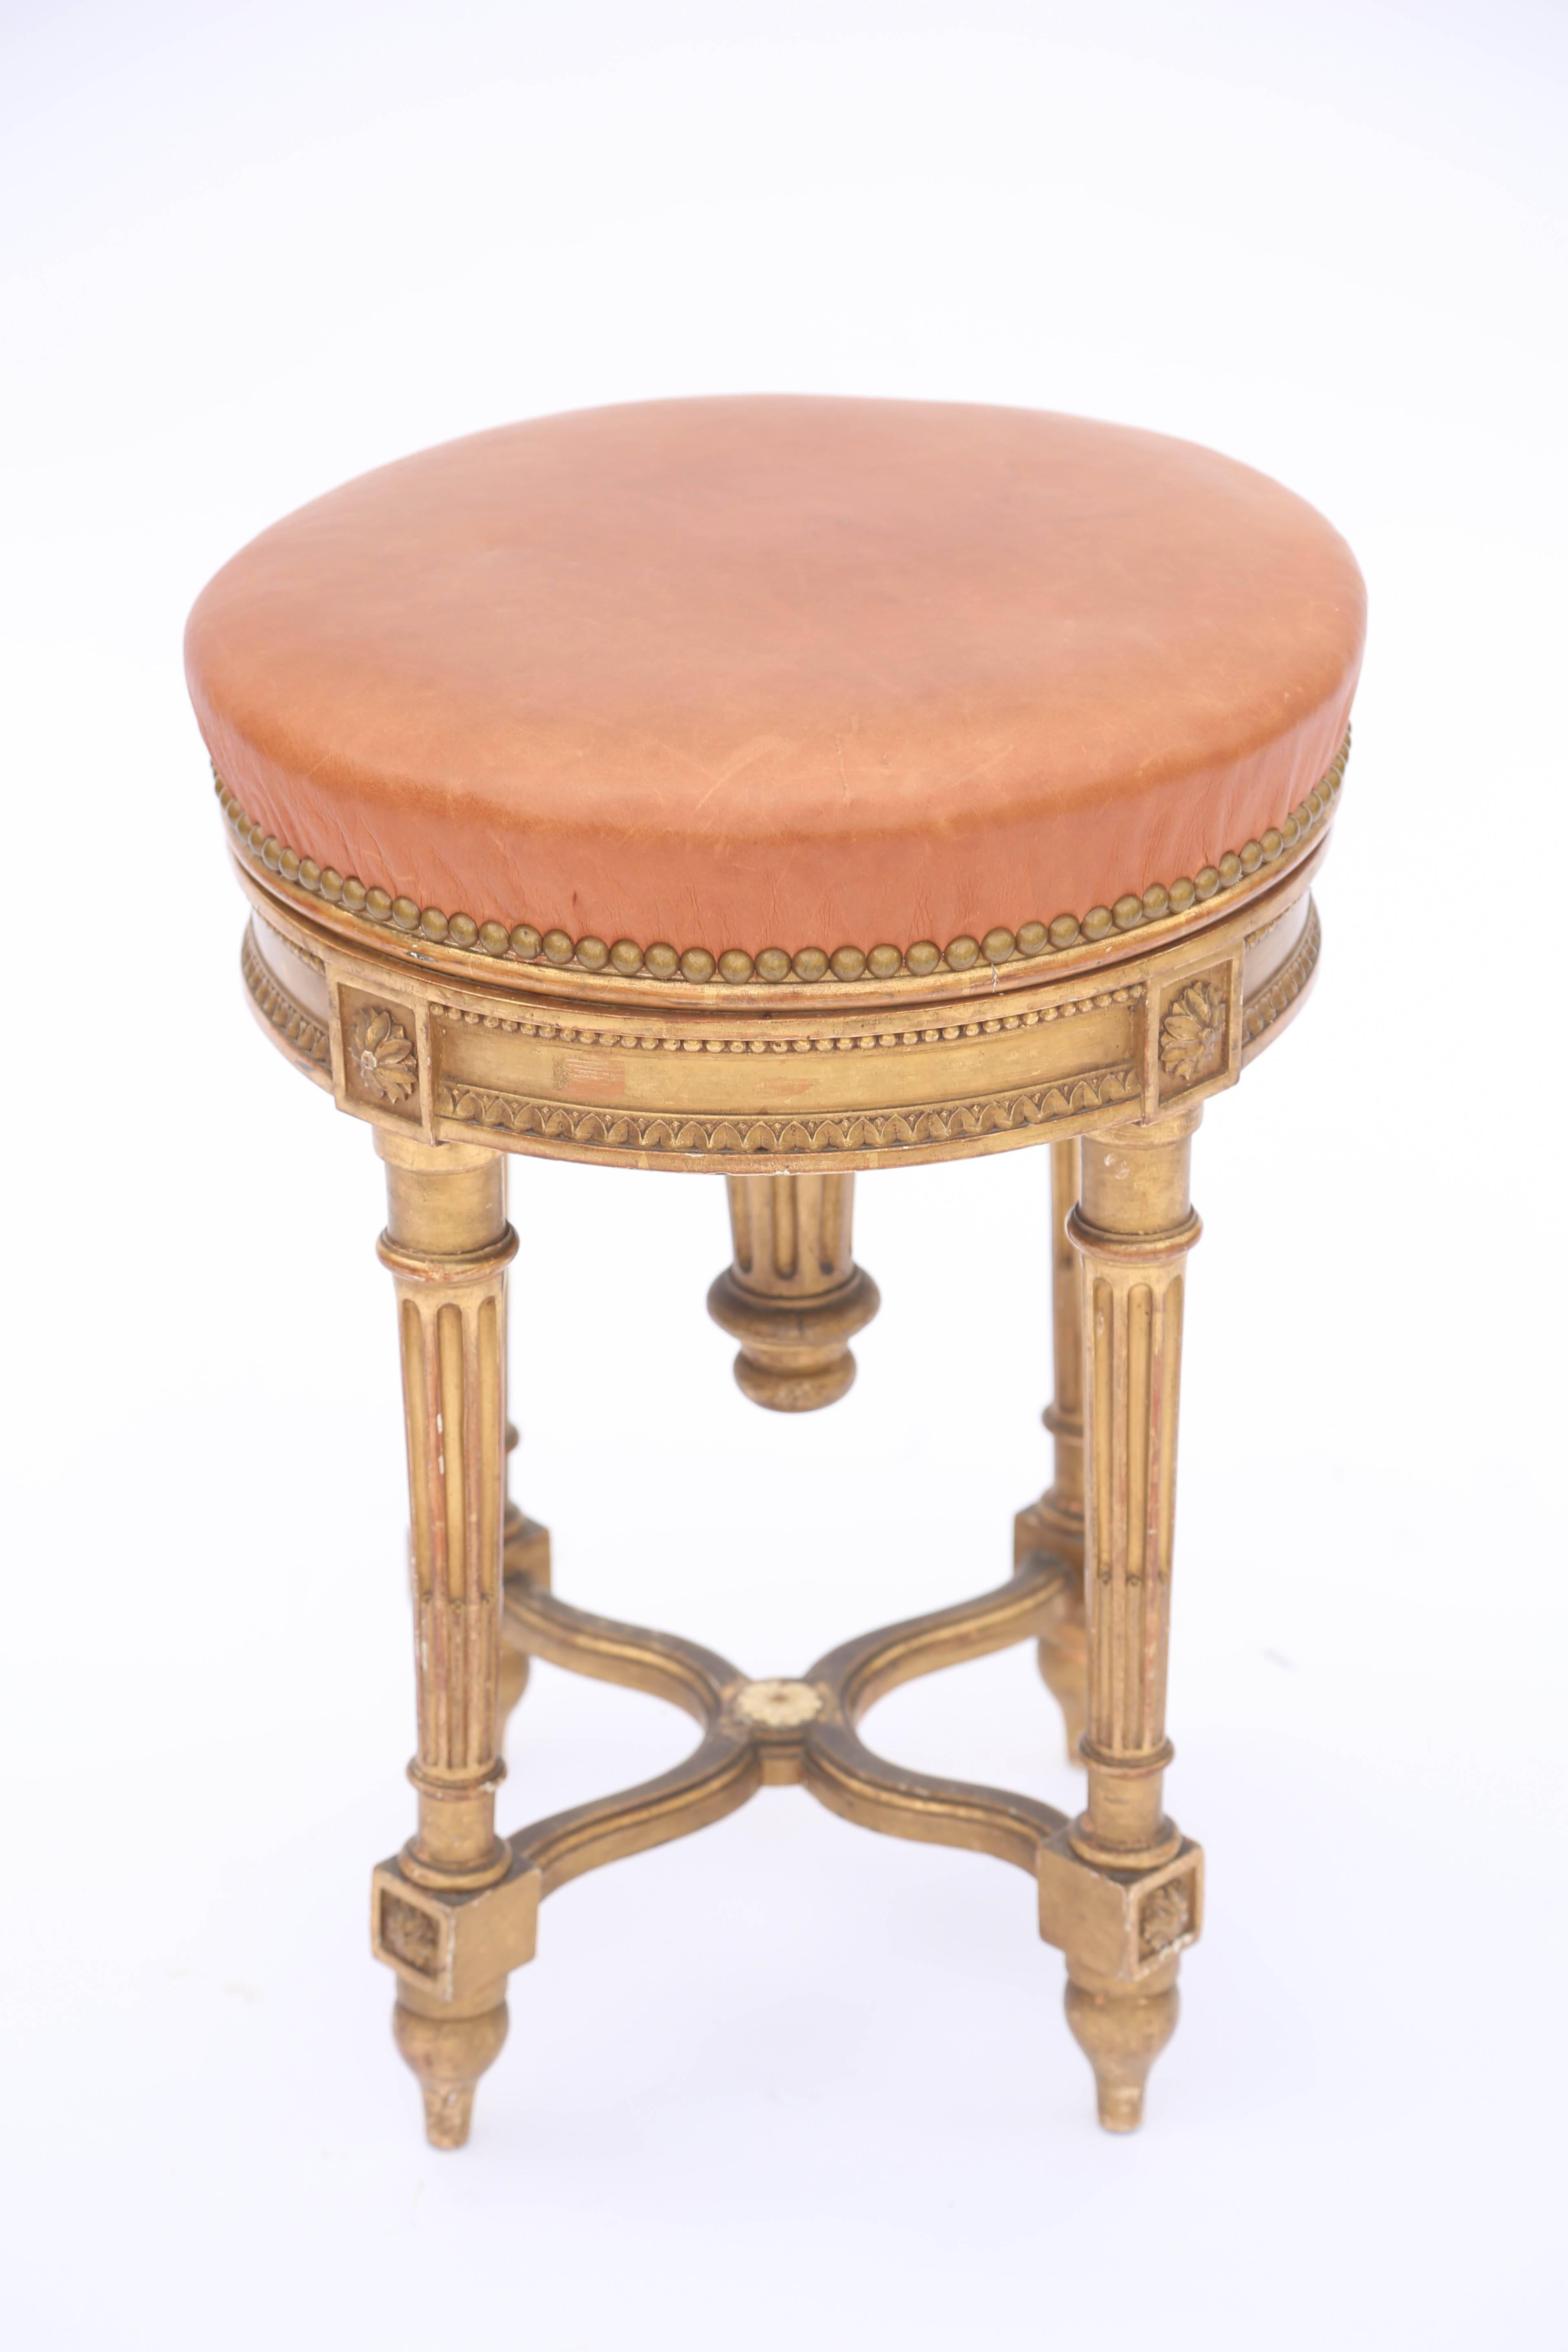 Adjustable height piano stool, in the Louis XVI style, of carved giltwood, its rotating round seat upholstered in leather with nailheads, on fielded apron carved with cockbeading and gadrooning, raised on four round, tapering, fluted legs, joined by